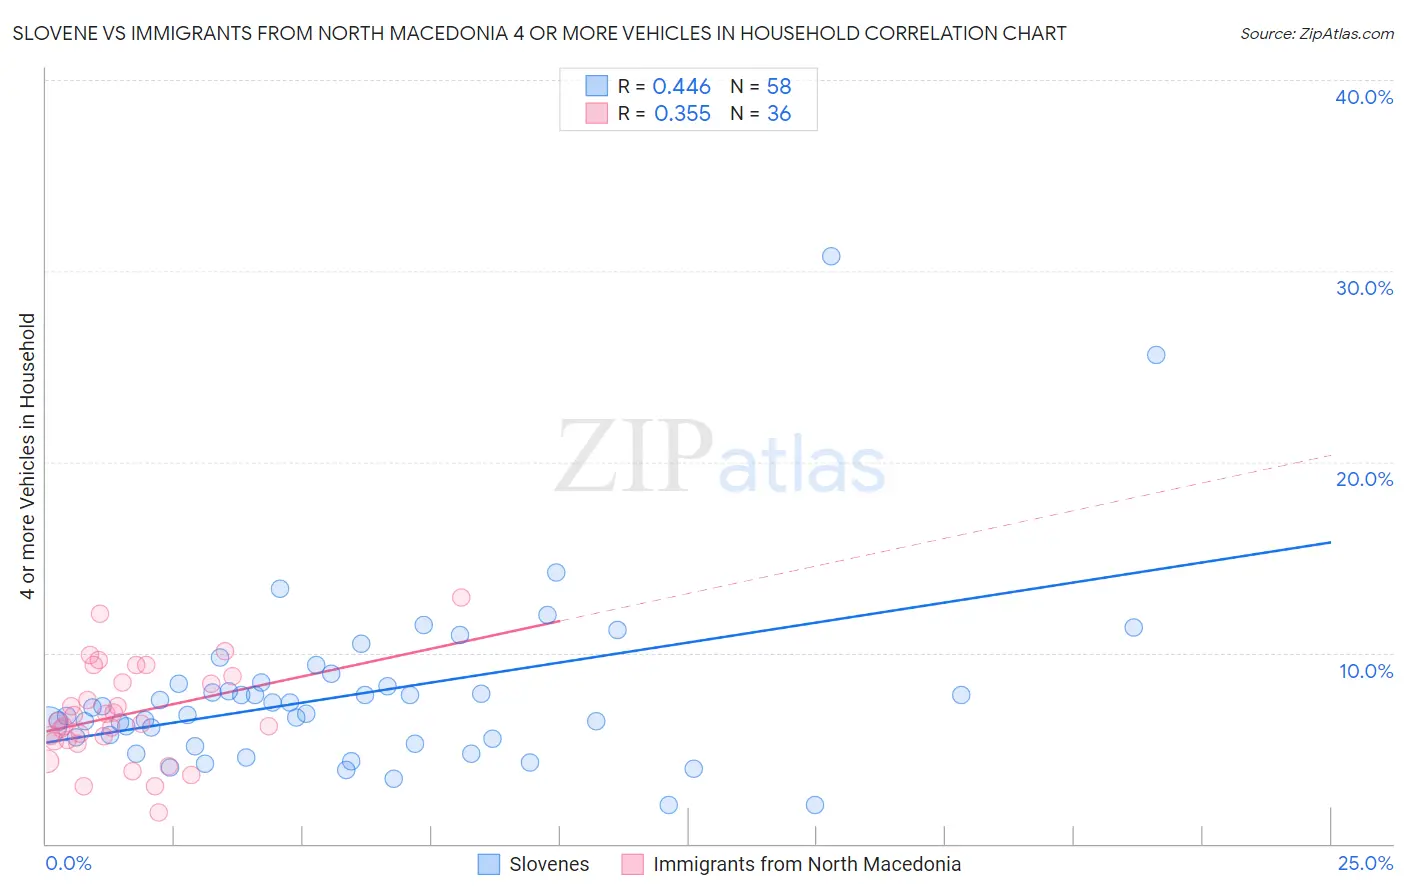 Slovene vs Immigrants from North Macedonia 4 or more Vehicles in Household